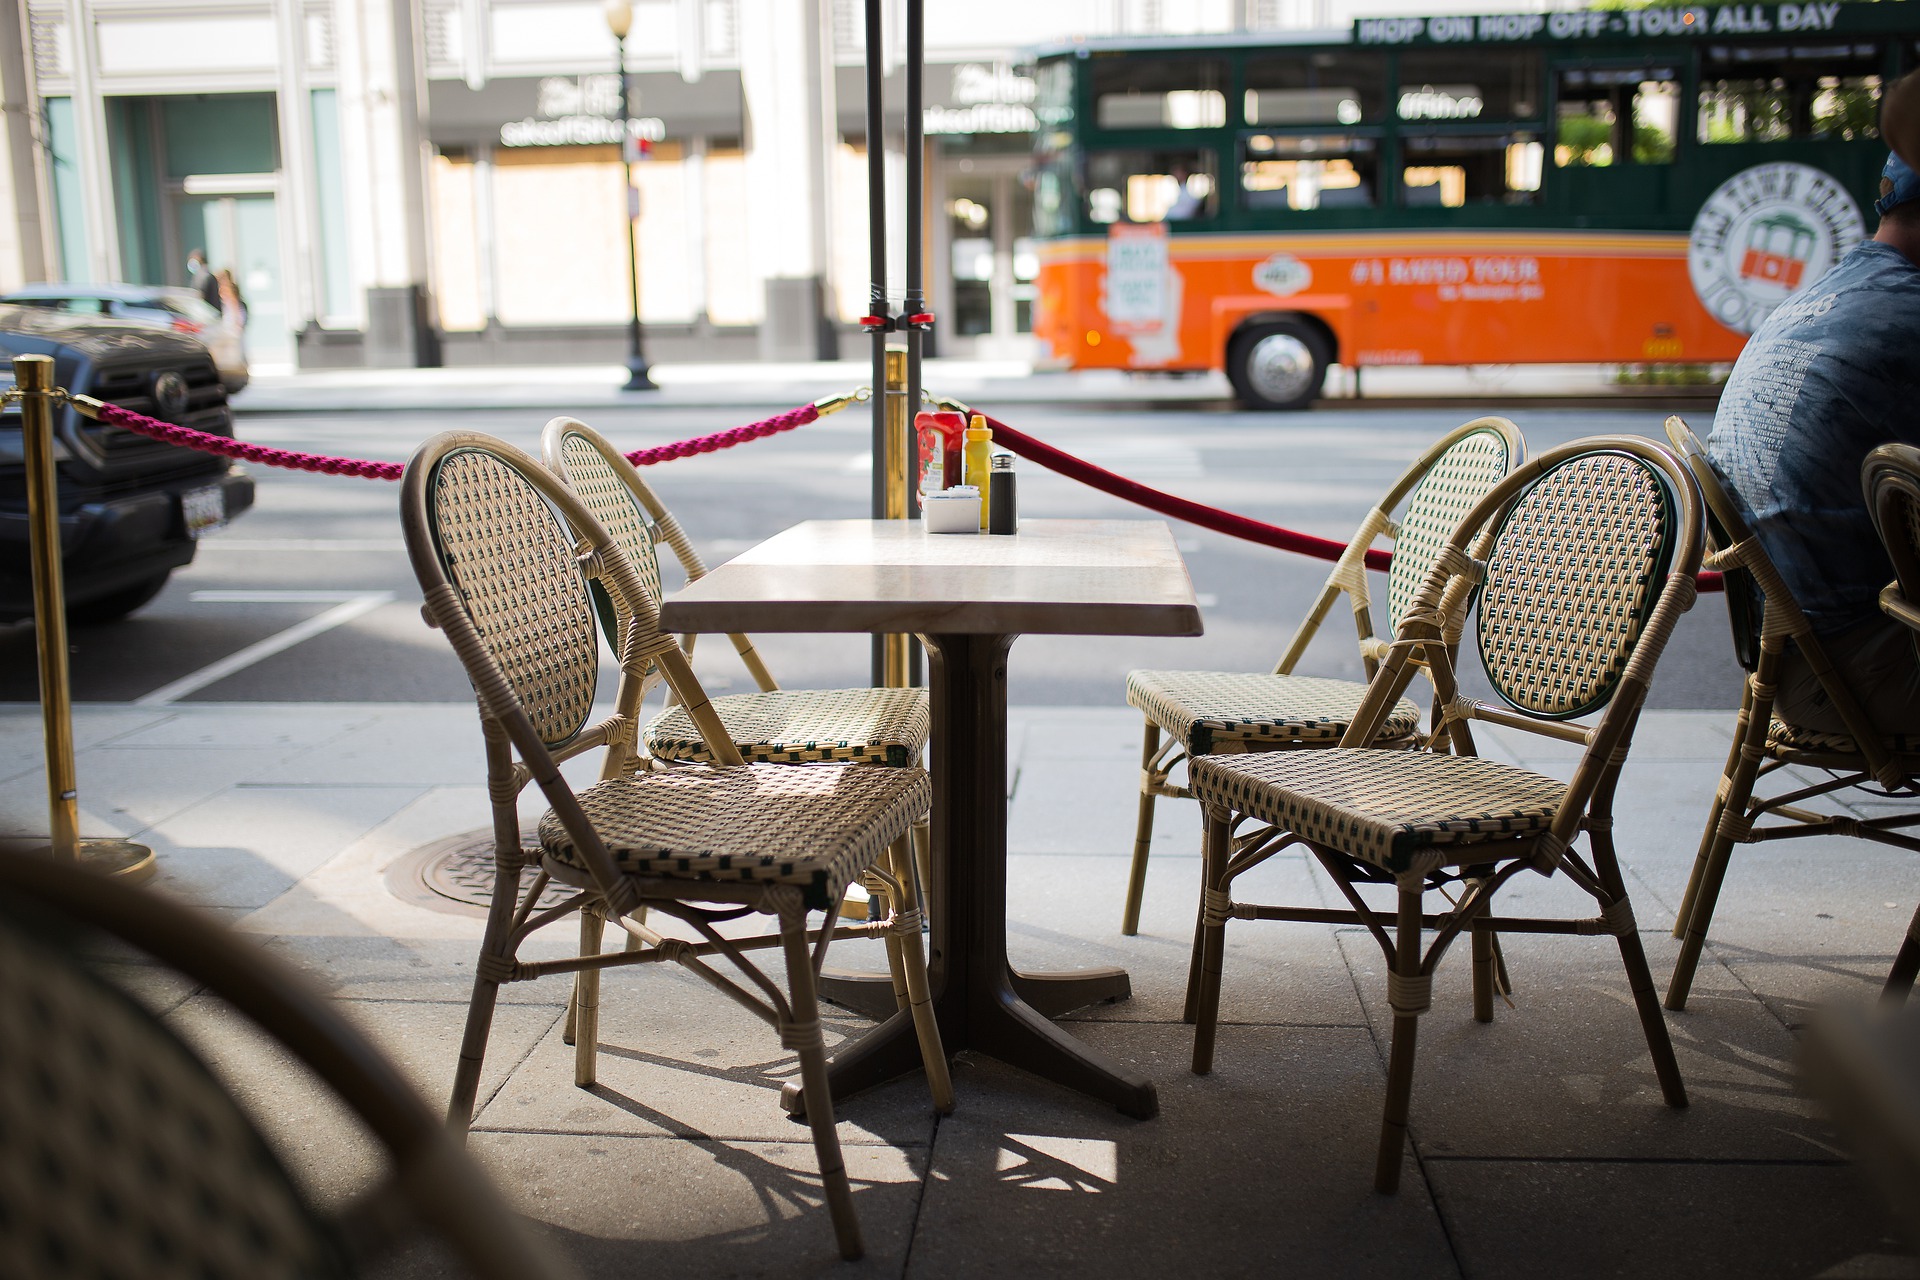 Photo of chairs outside a cafe